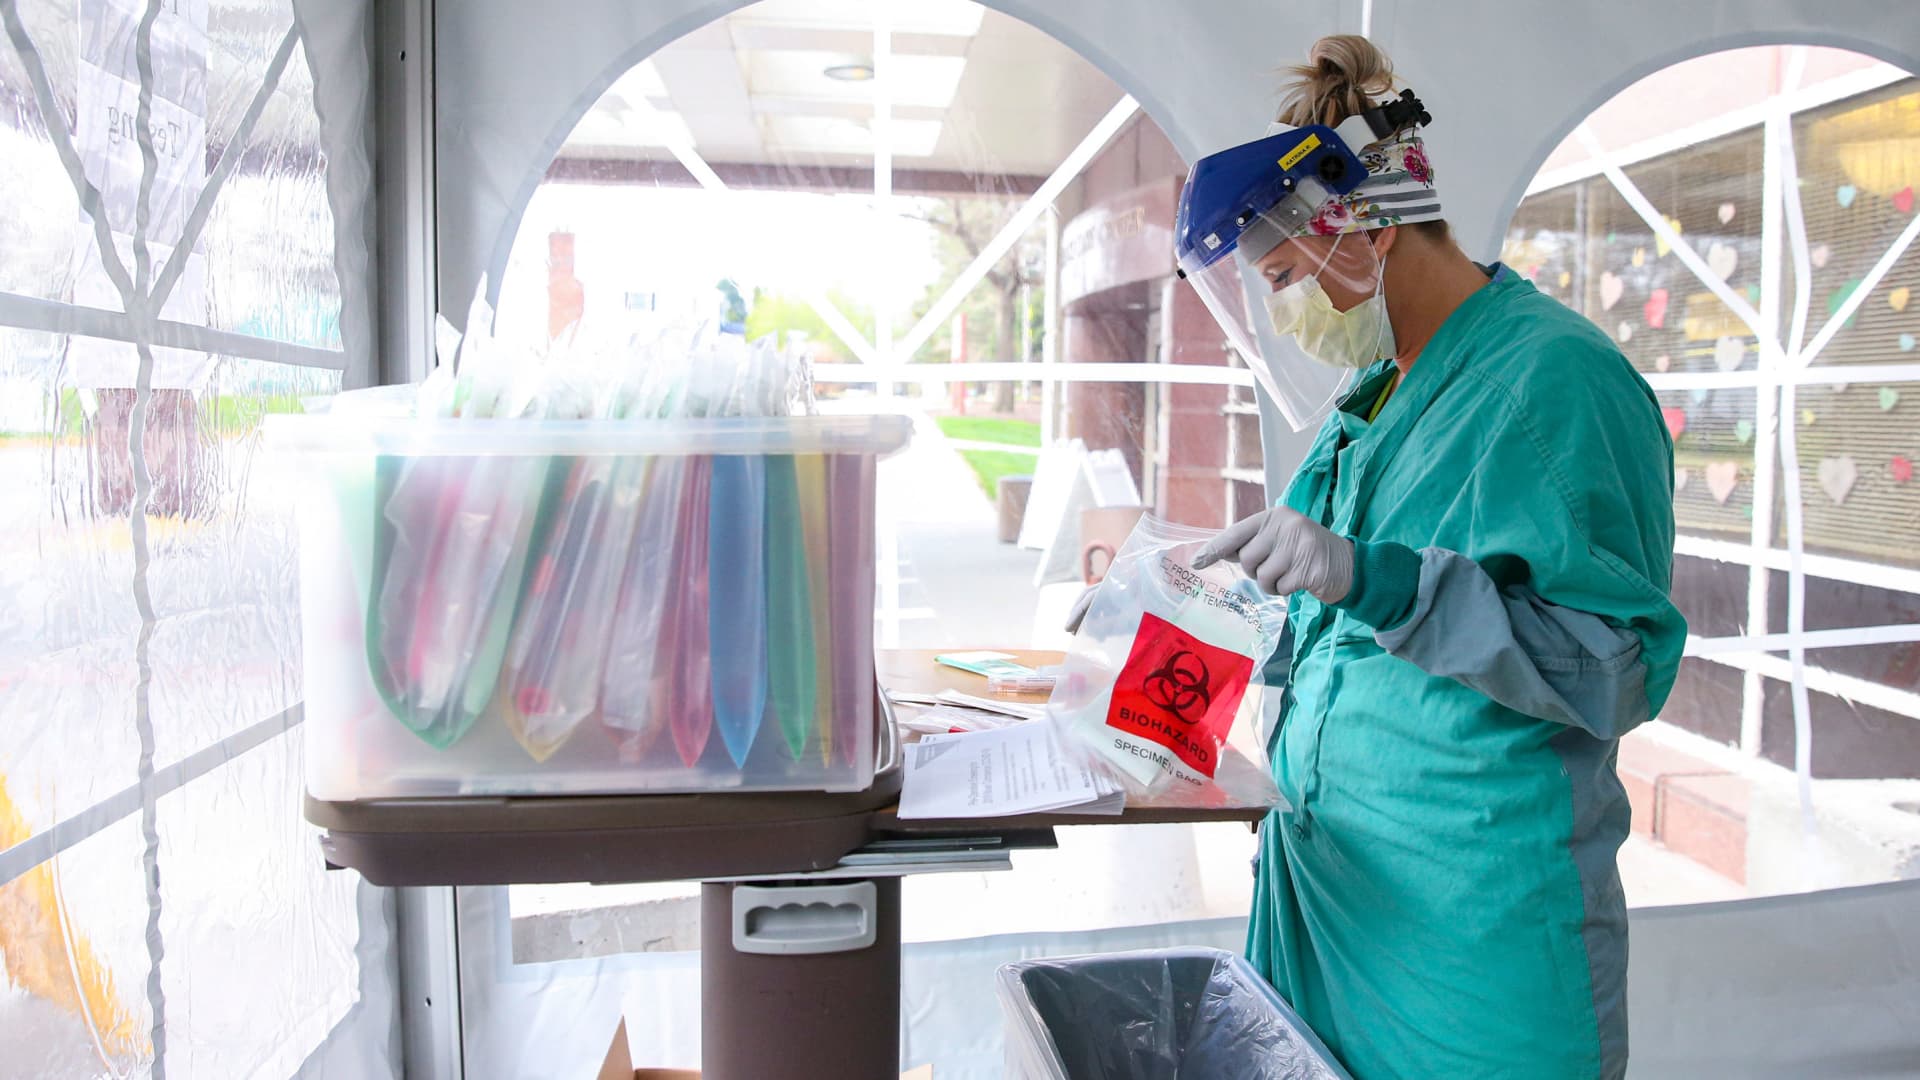 Medical assistant Katrina Rogers opens a biohazard bag used to seal coronavirus test swab specimens at the University of Iowa Hospitals and Clinics Family Medicine Clinic, Monday, April 20, 2020, in Iowa City, Iowa.